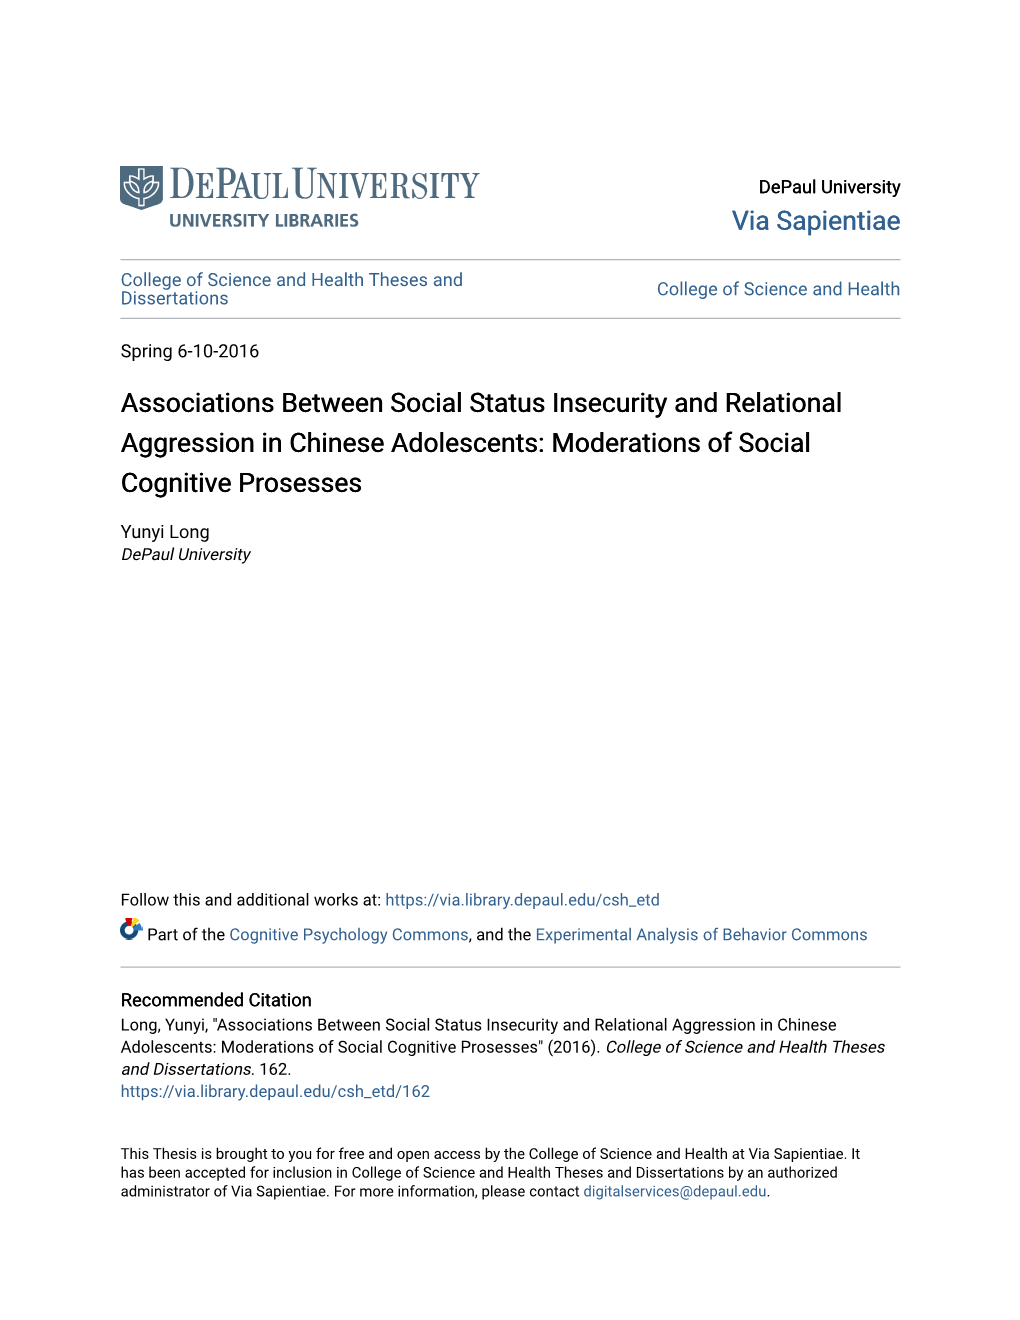 Relational Aggression and Social Status Insecurity